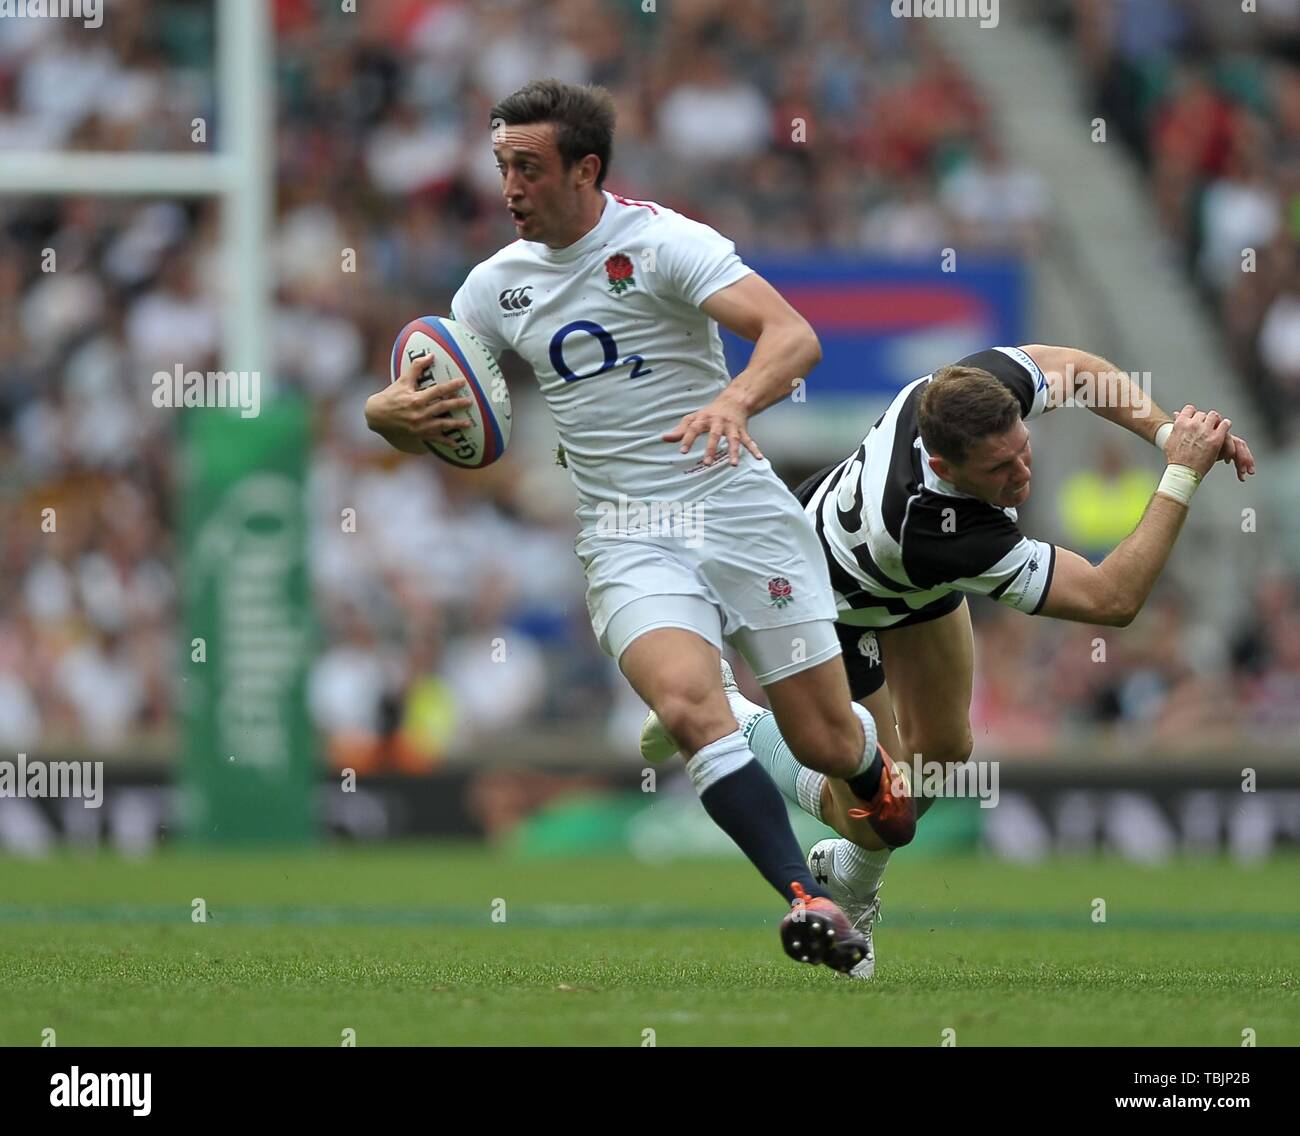 Twickenham Stadium. London. UK. 2nd June 2019. Quilter Cup. England XV v Babarians. Alex Mitchell (England) goes past Colin Slade (Babarians). 02/06/2019. Credit: Sport In Pictures/Alamy Live News Credit: Sport In Pictures/Alamy Live News Stock Photo